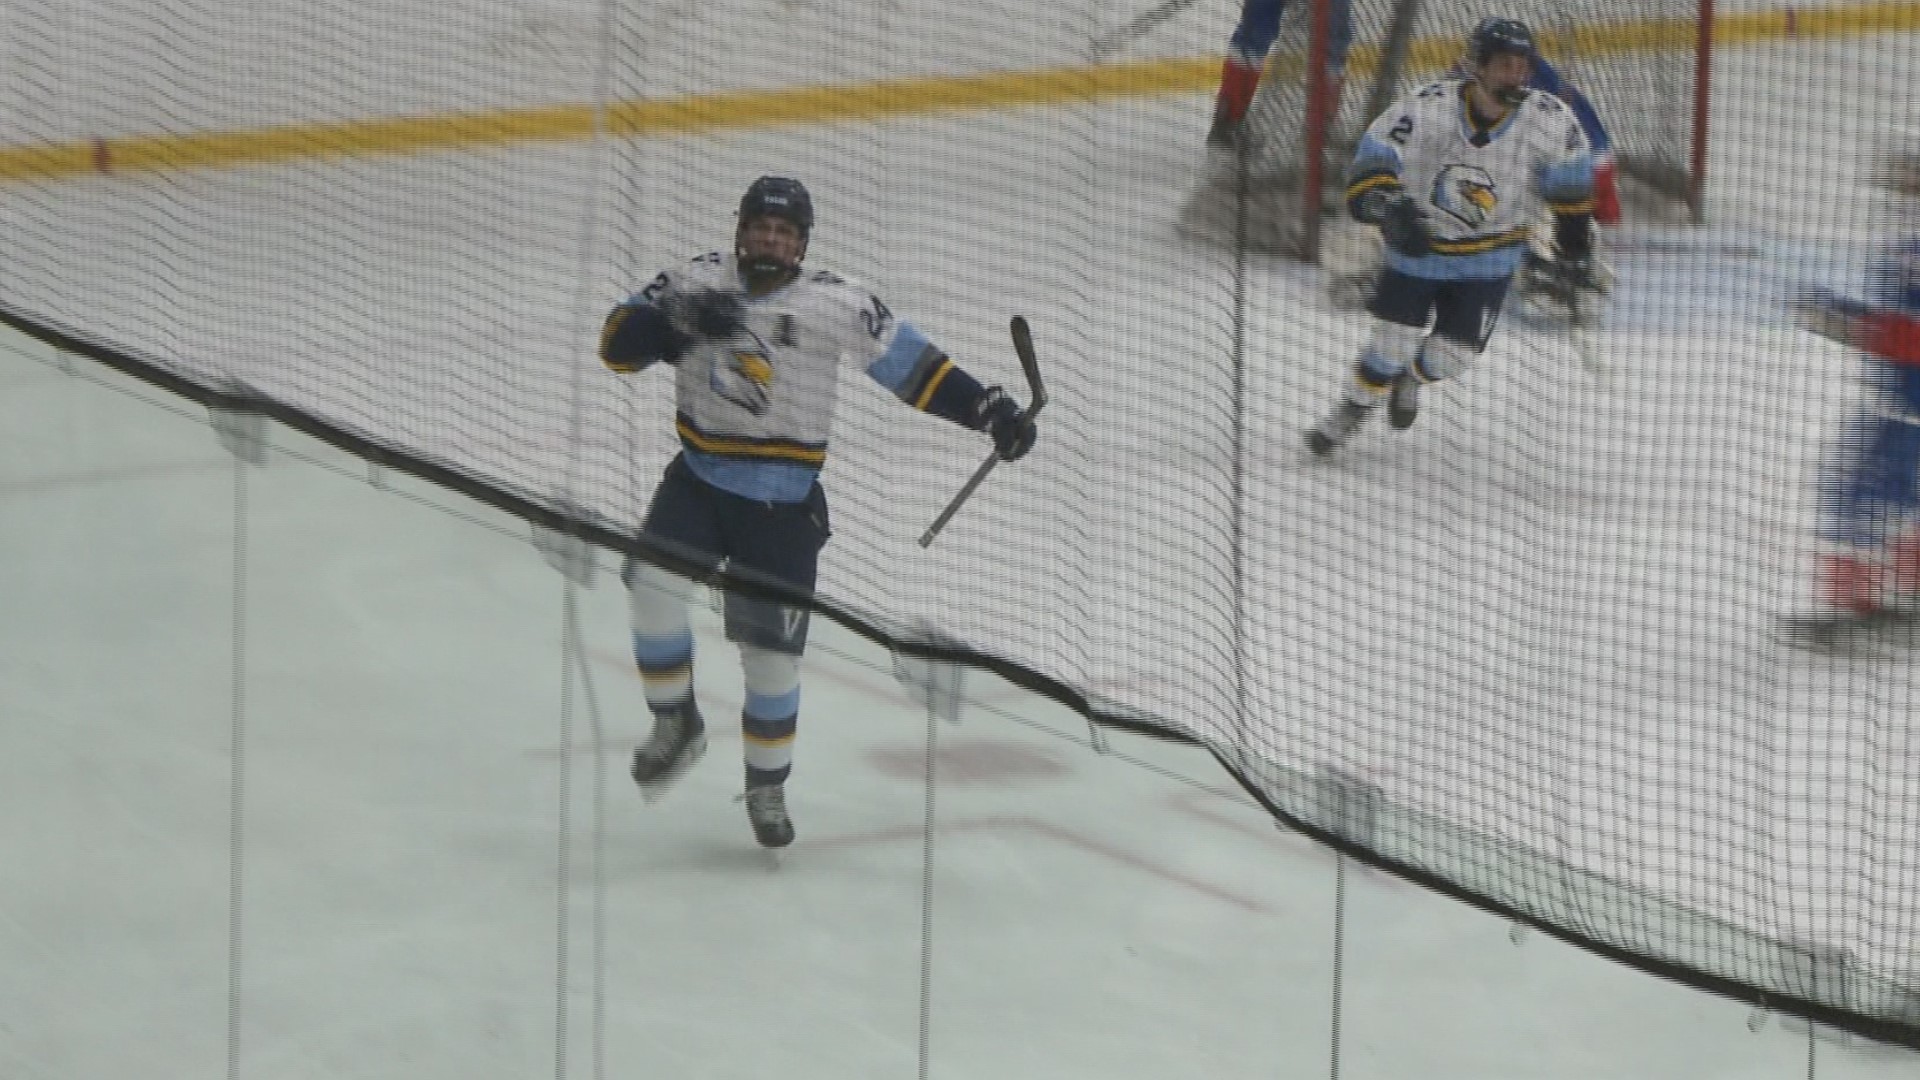 The Eagles defeated Cherry Creek 4-1 in the Frozen Four on Saturday night.